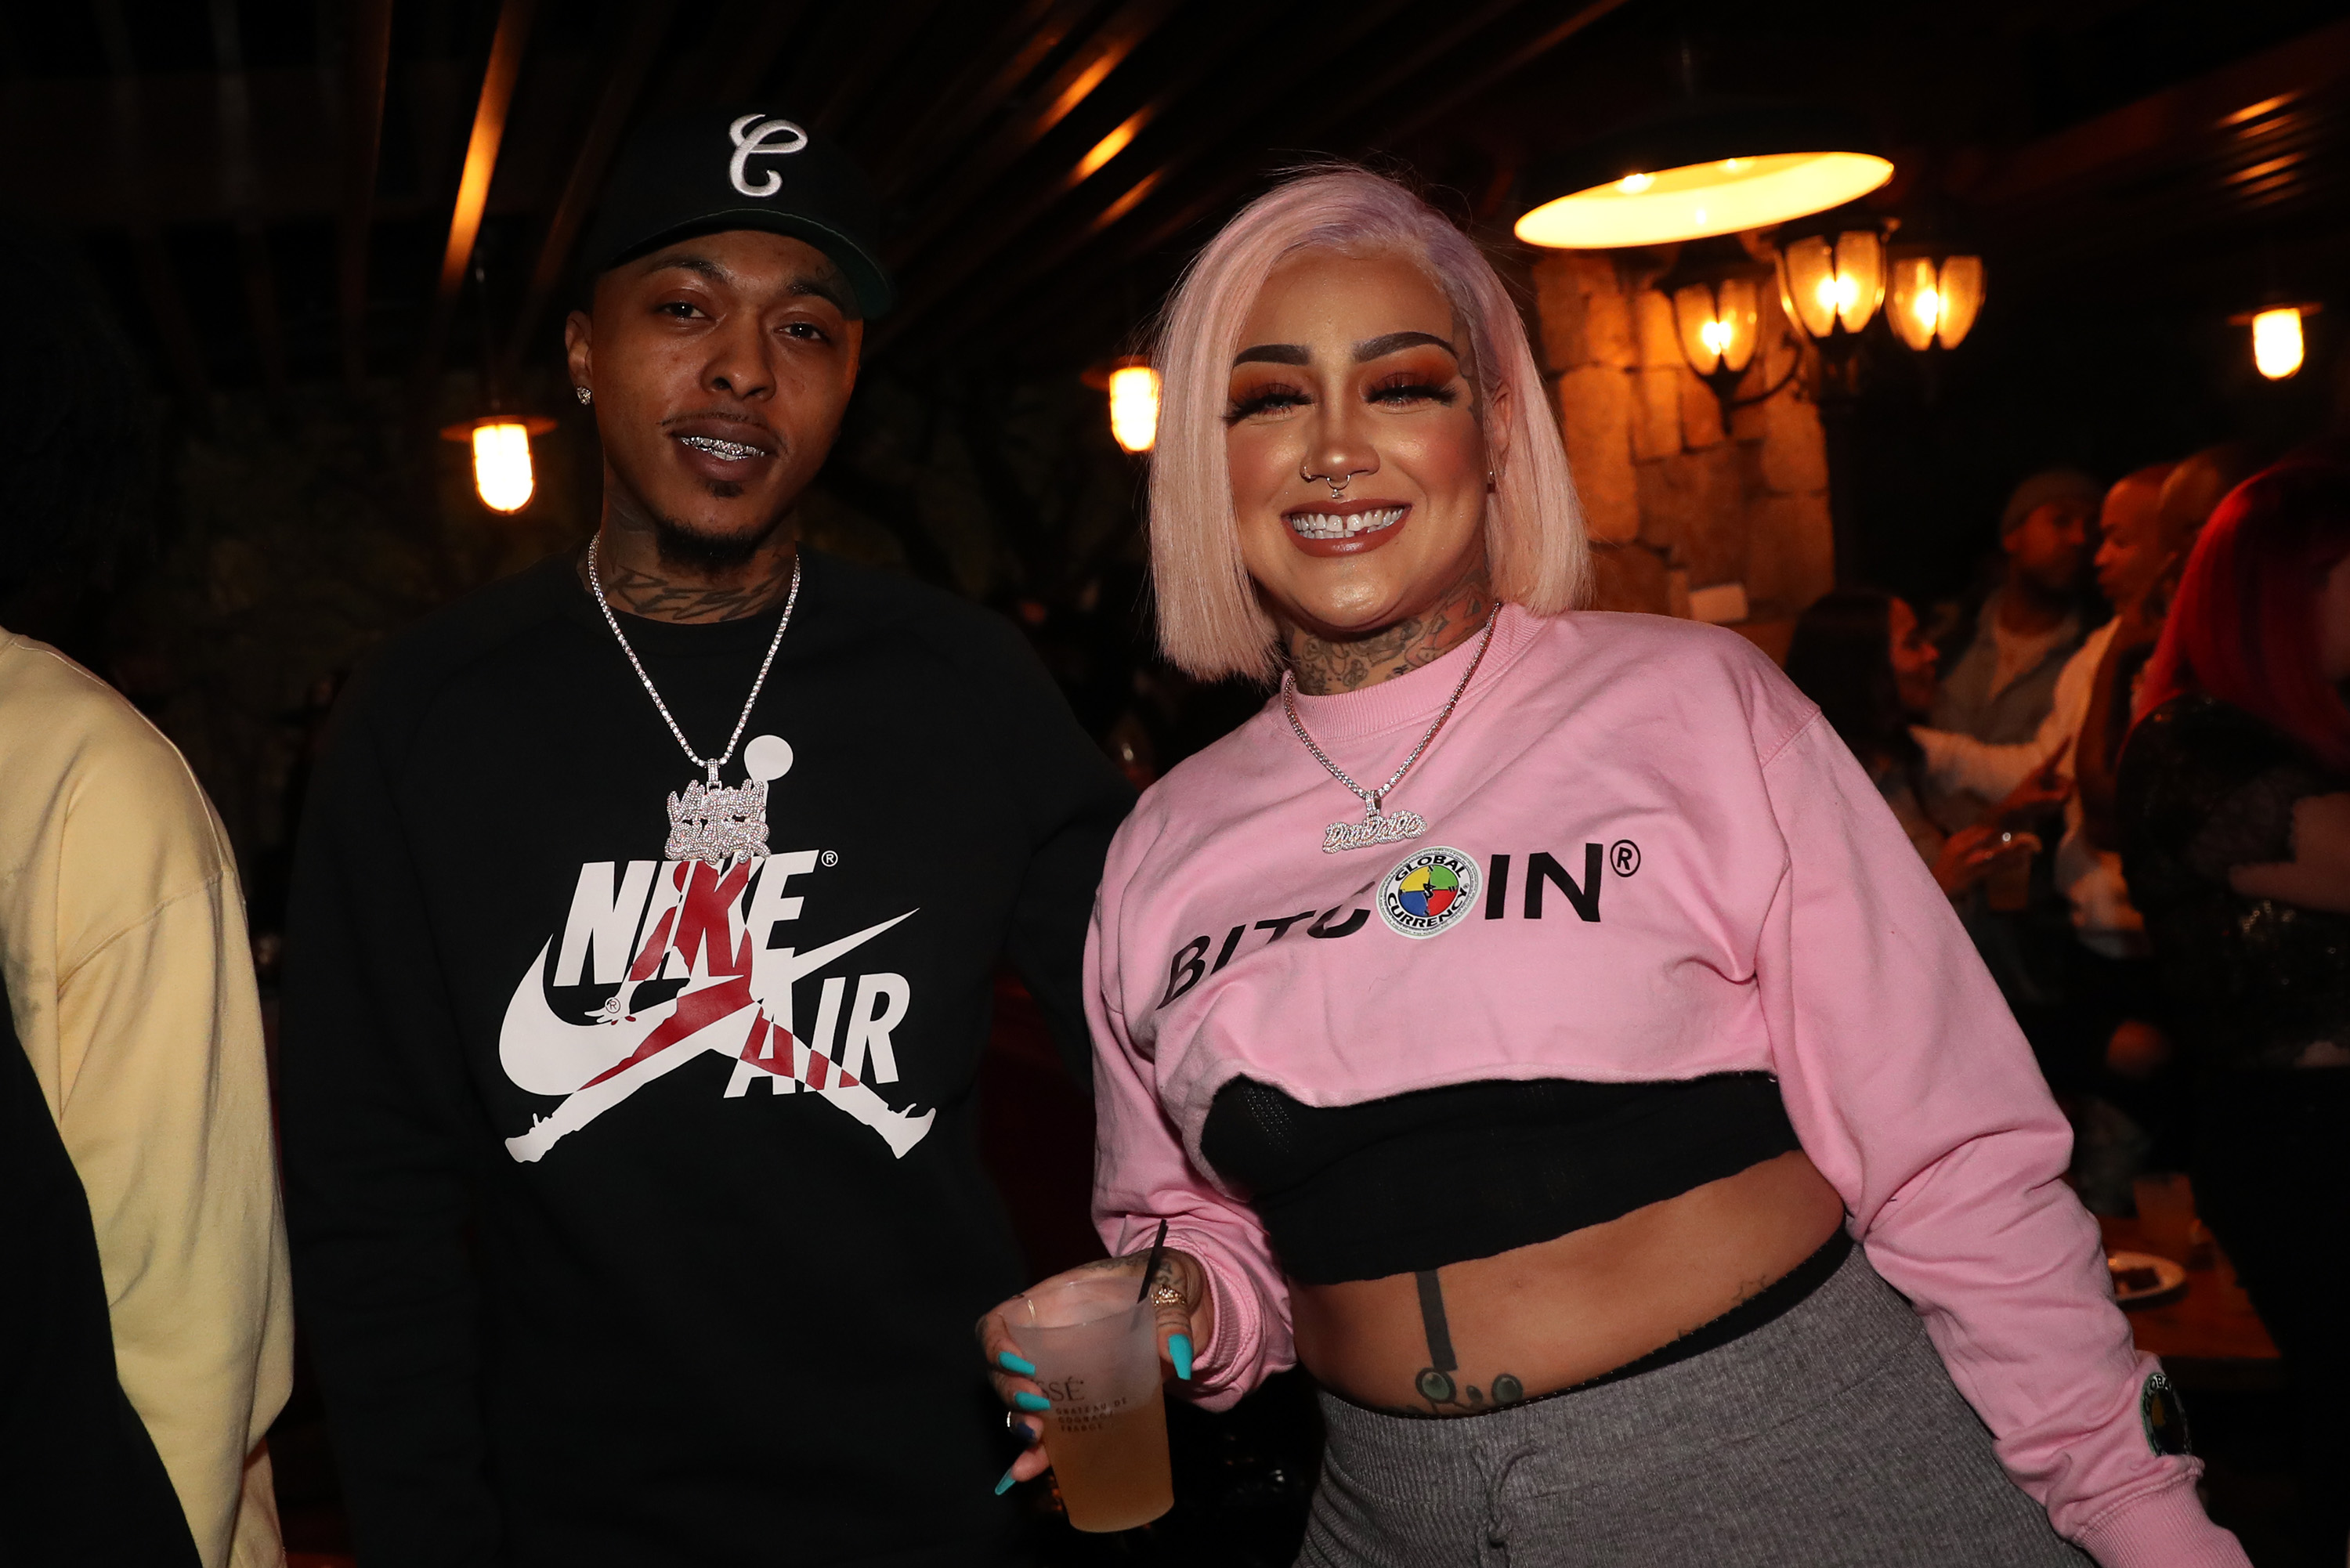 'Black Ink Crew' stars Alex Robinson and Donna Lombardi posing next to each other at Angela Yee's birthday party